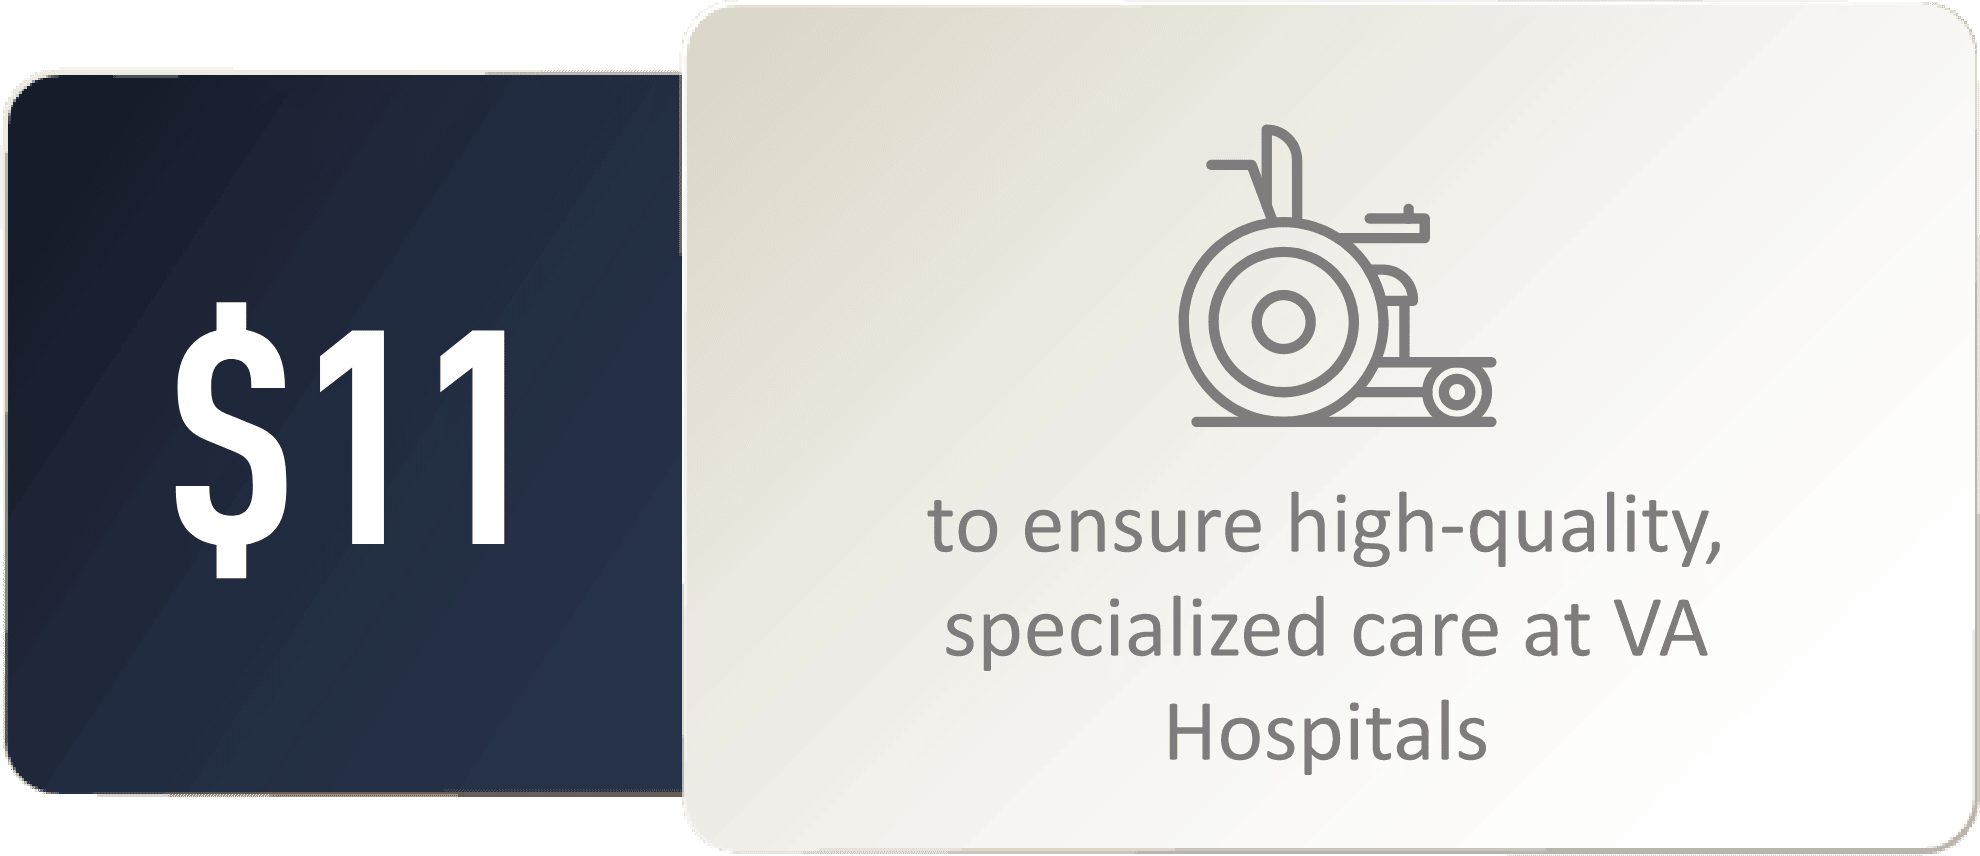 $!1 to ensure high quality specialized care at VA hospitals